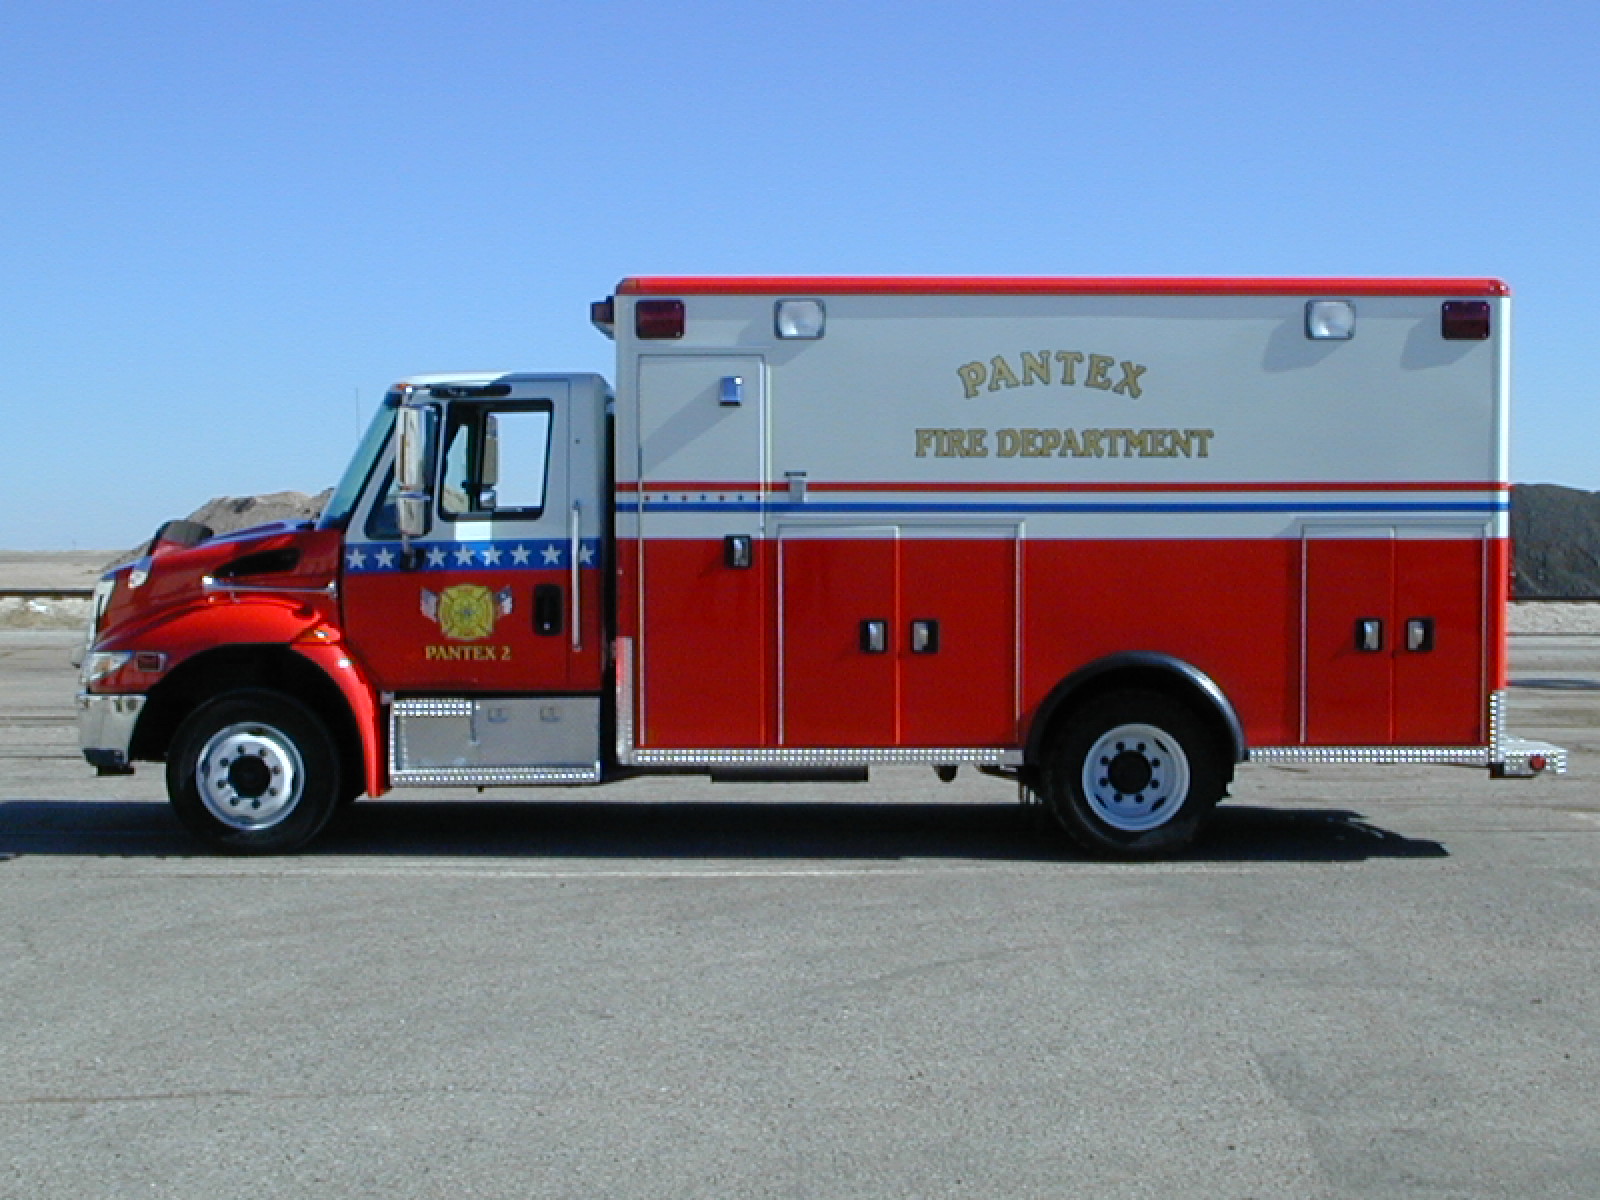 A Pantex ambulance has been loaned to Perryton to assist its EMS team following the June 15 tornado.